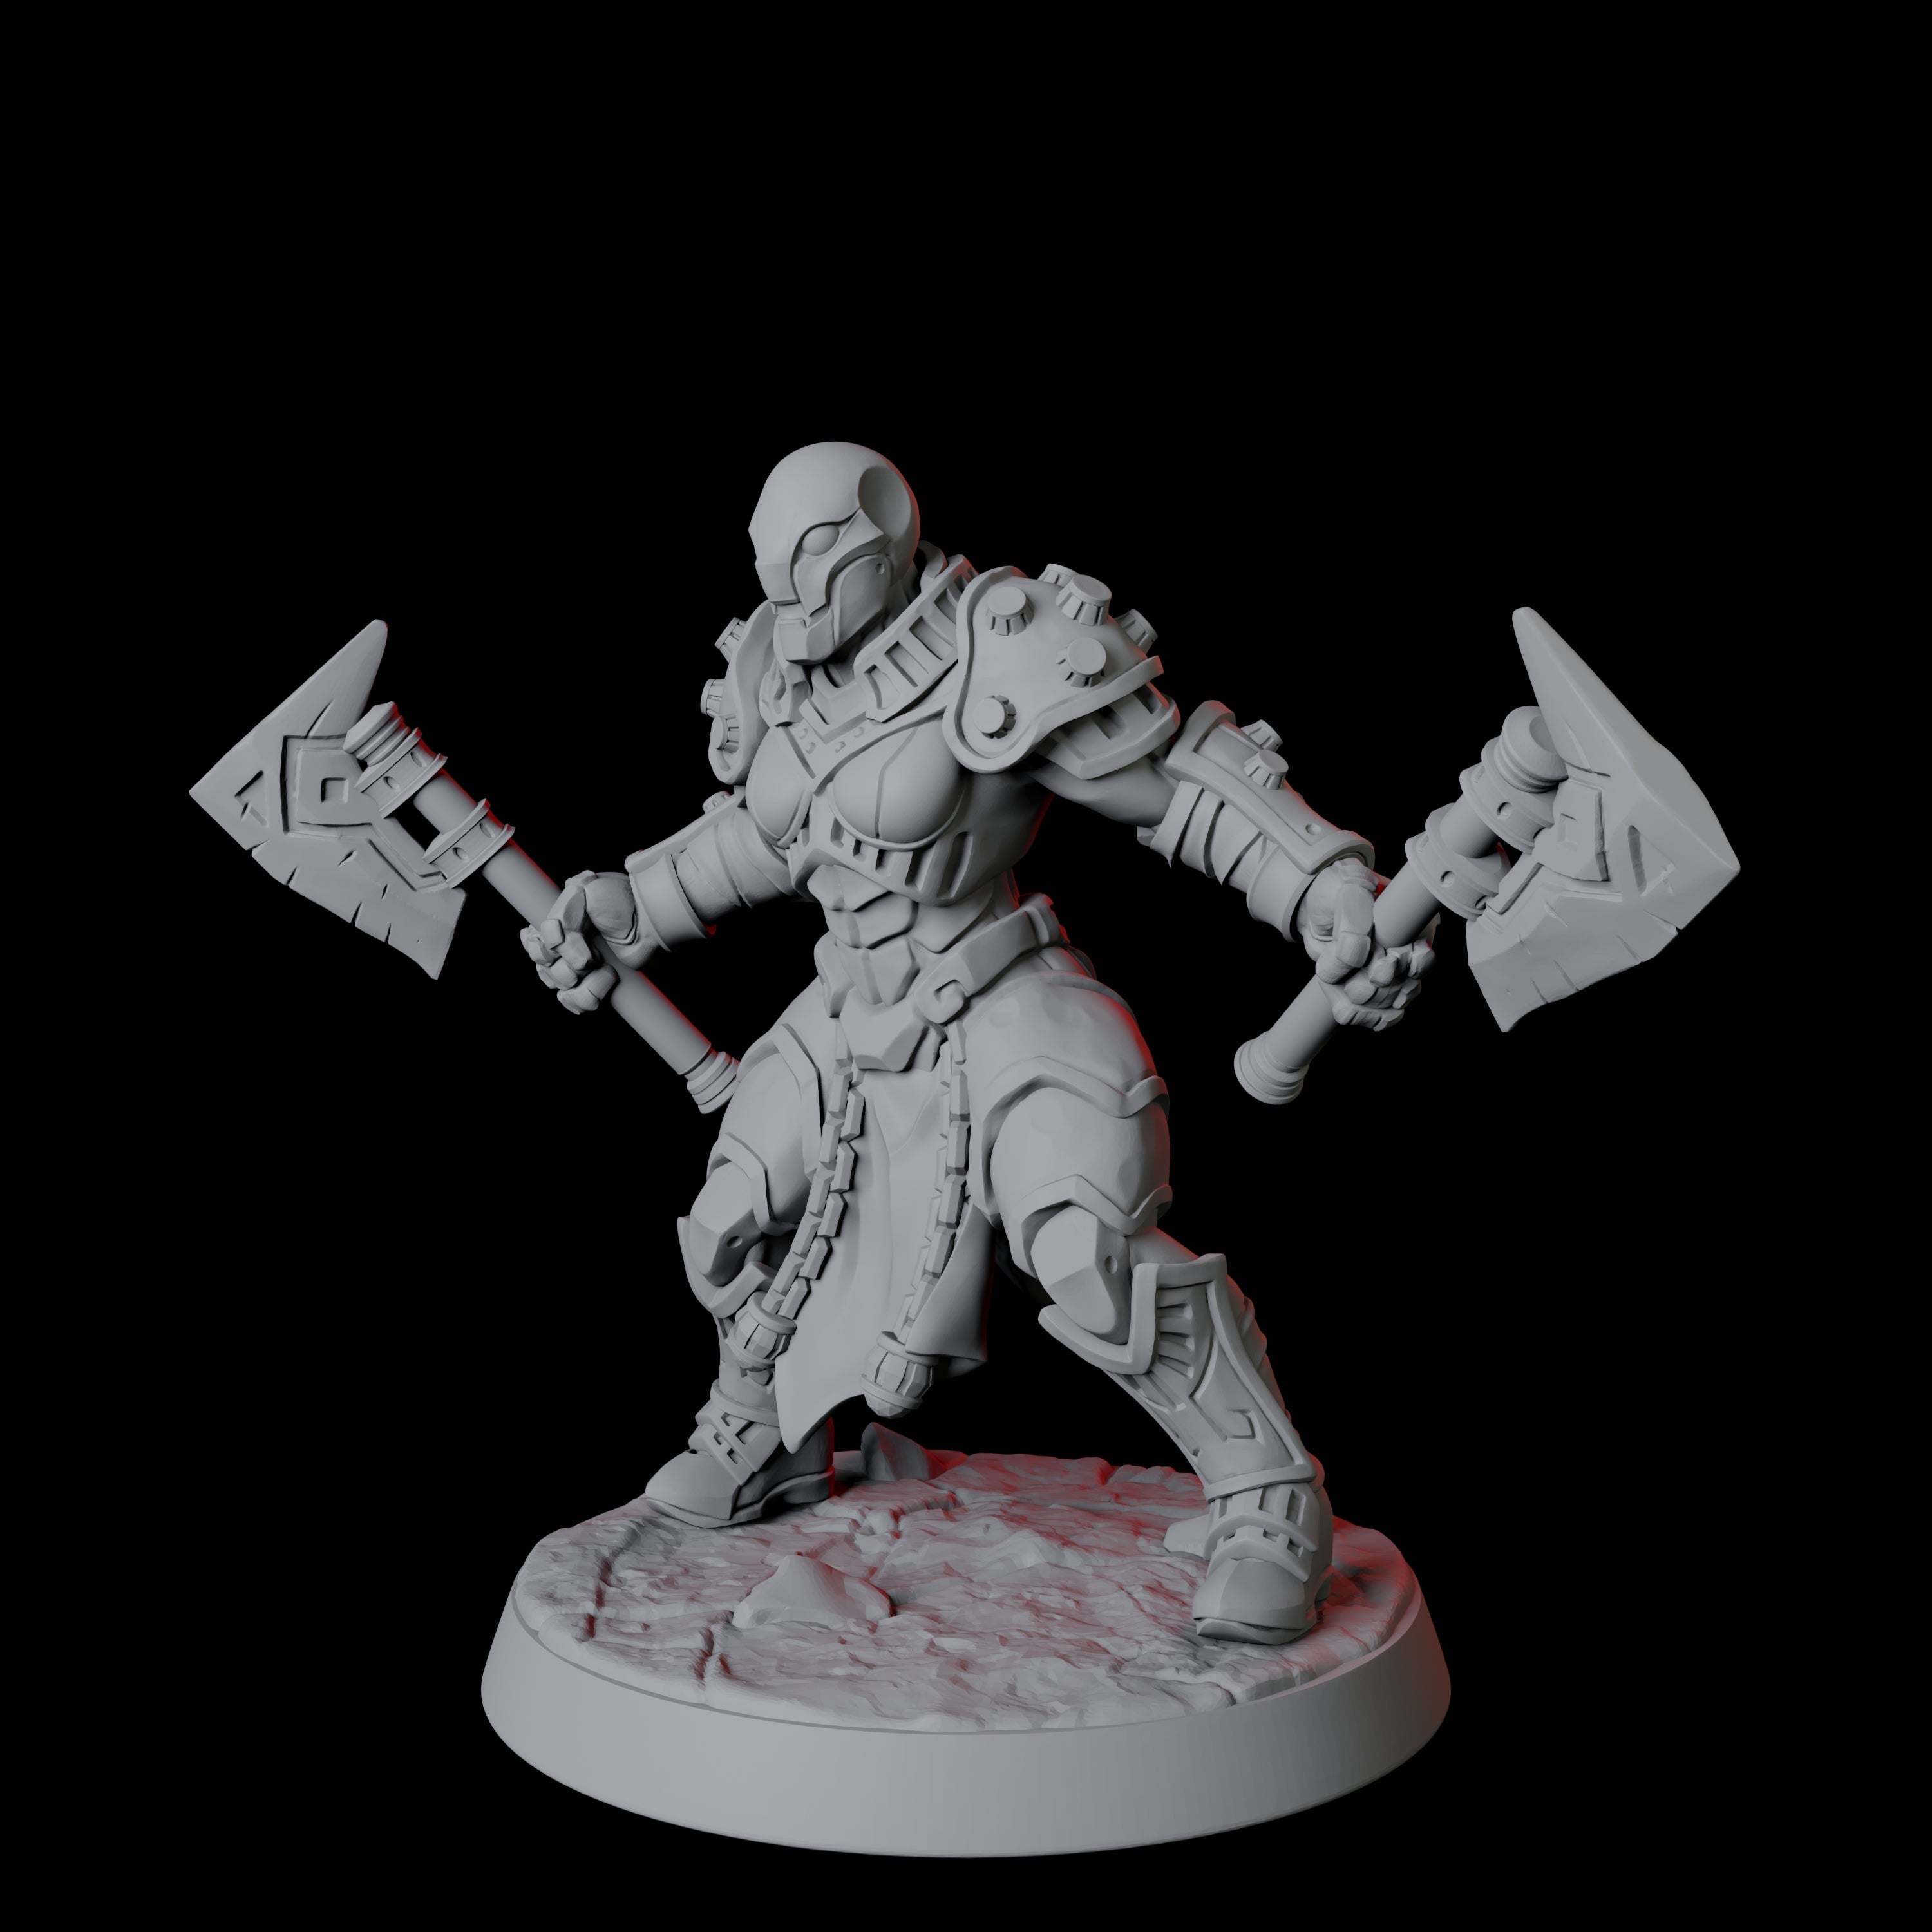 Battle-Ready Warforged F Miniature for Dungeons and Dragons, Pathfinder or other TTRPGs